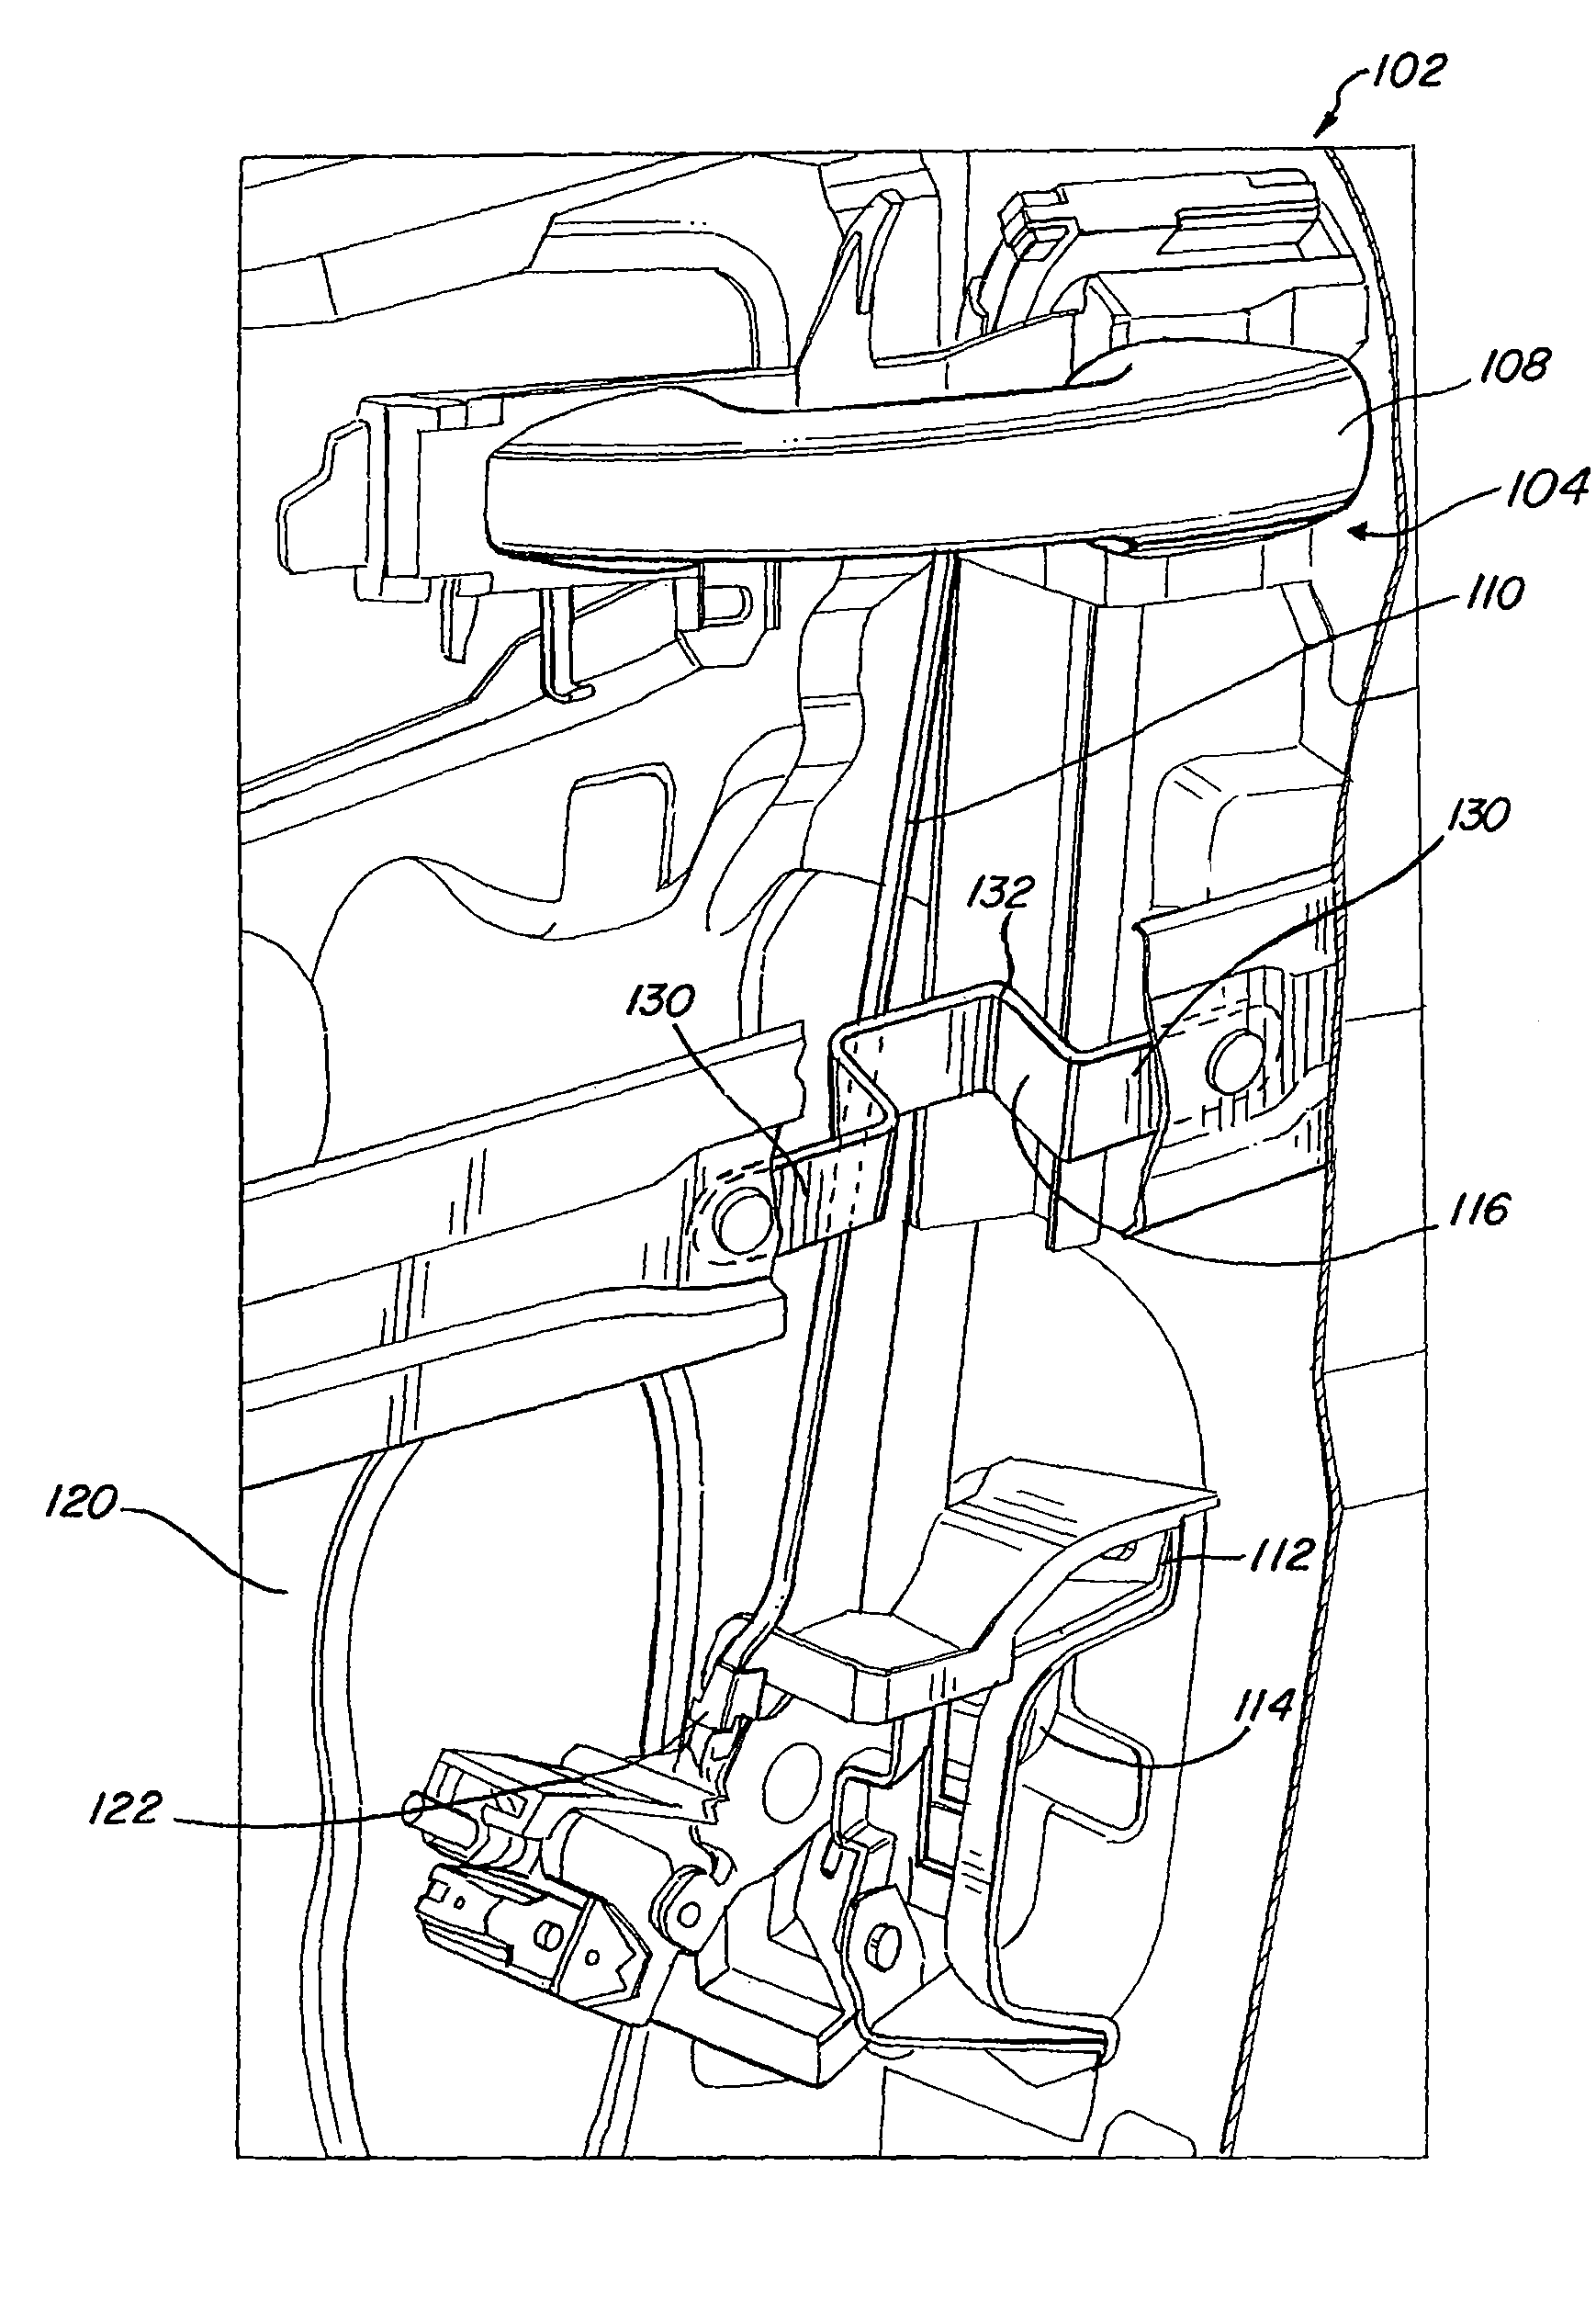 Method and system for deforming a drive rod in a door after an impact to the door